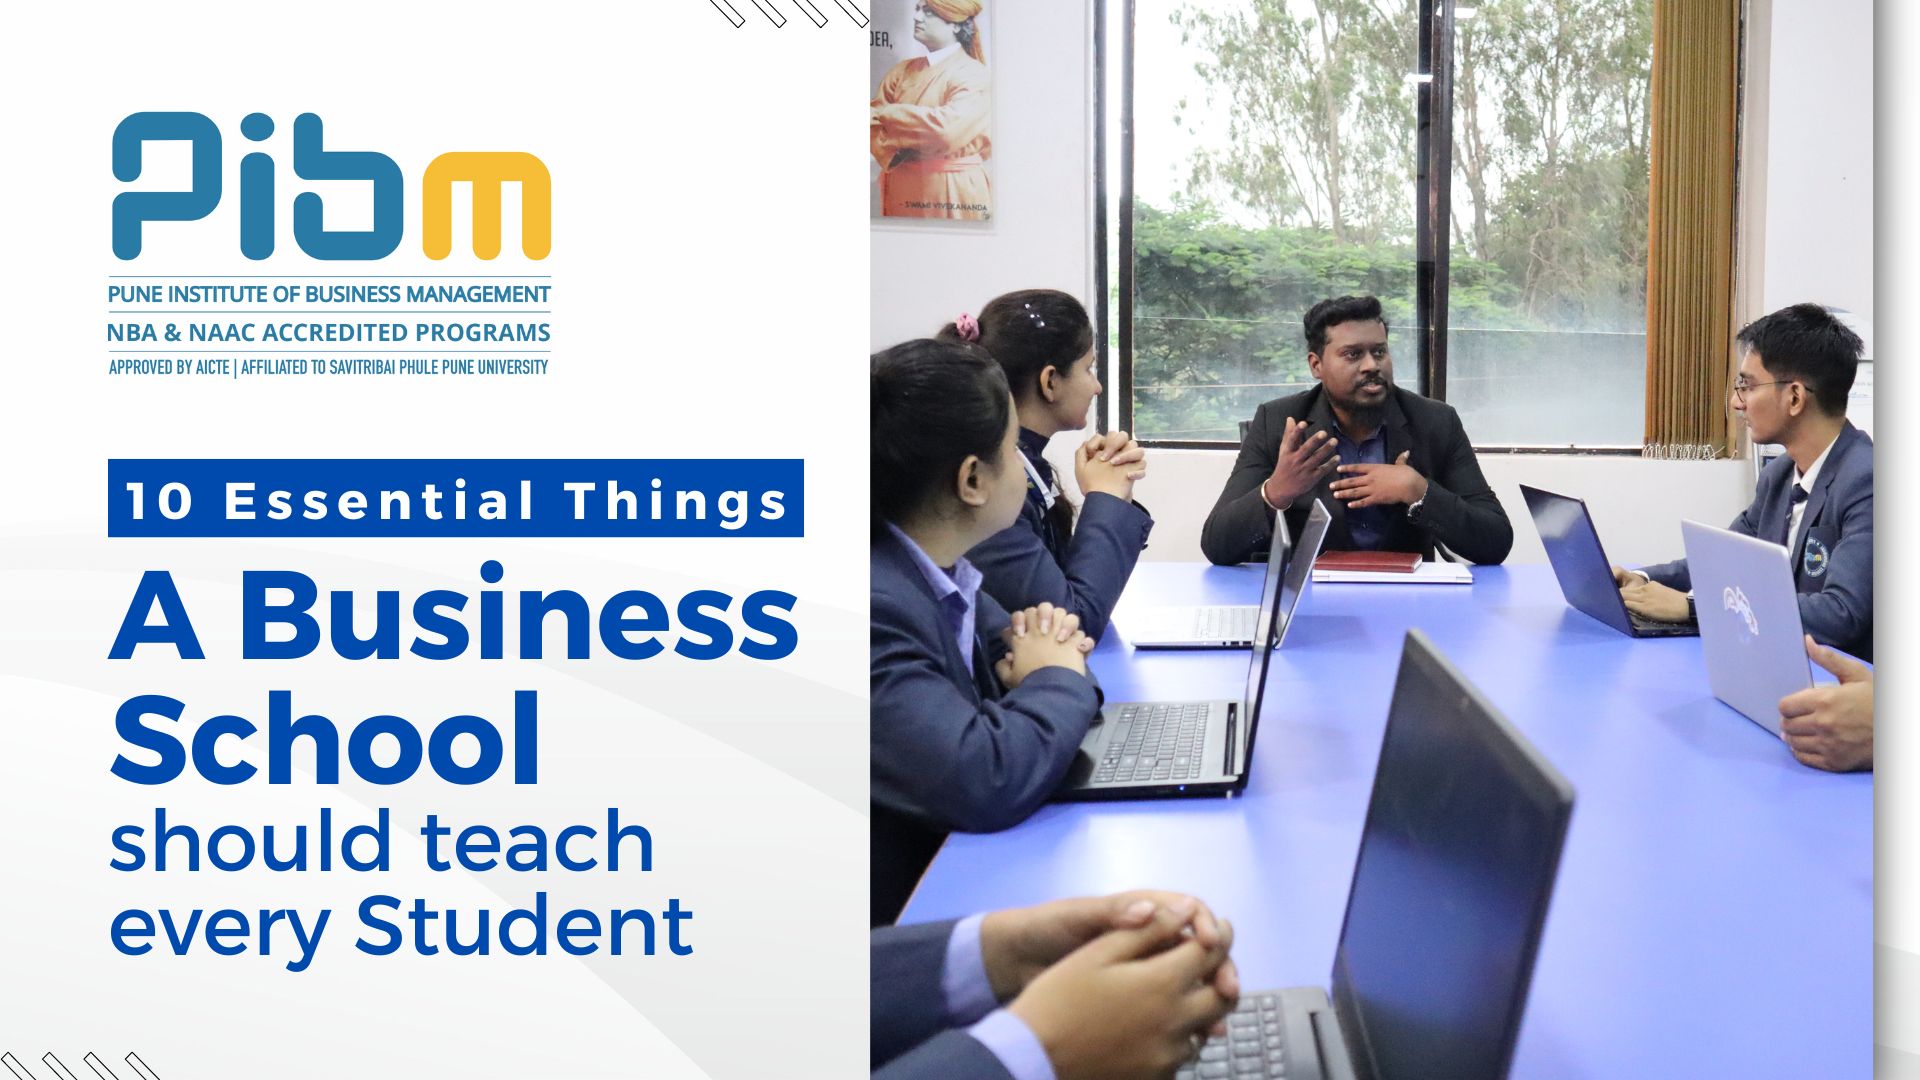 10 Essential Things a Business School should teach every Student